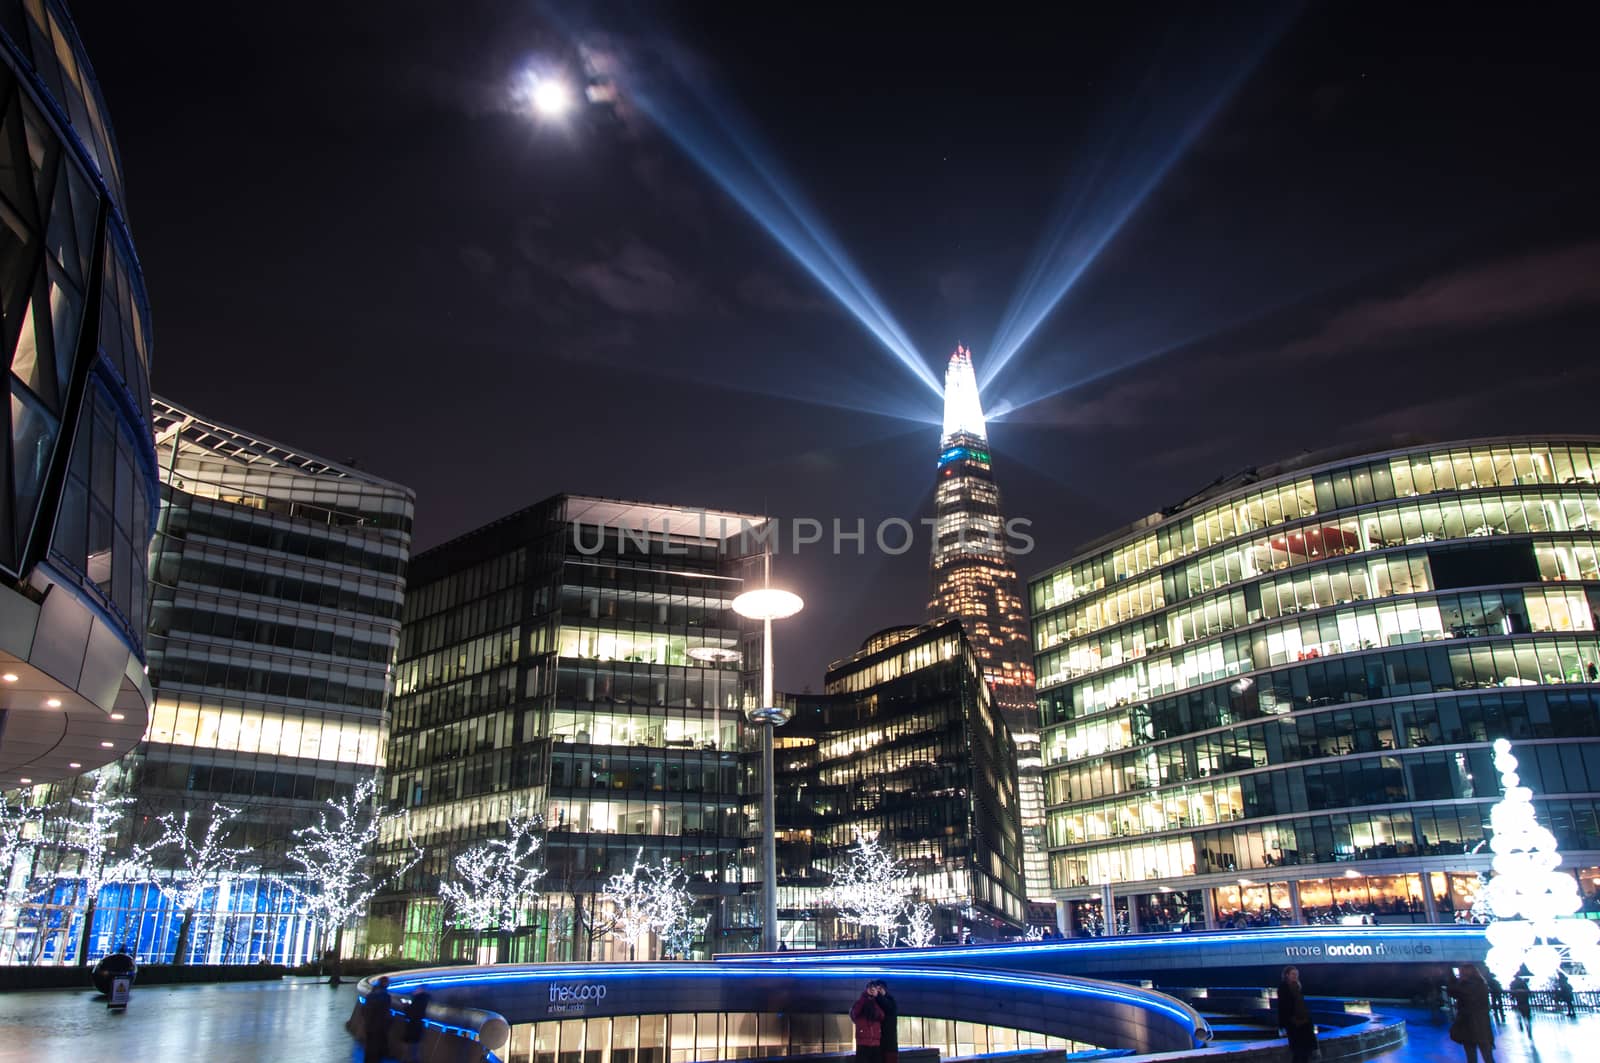 Shard building, London - light show in New Year's Eve 2015 by mitakag